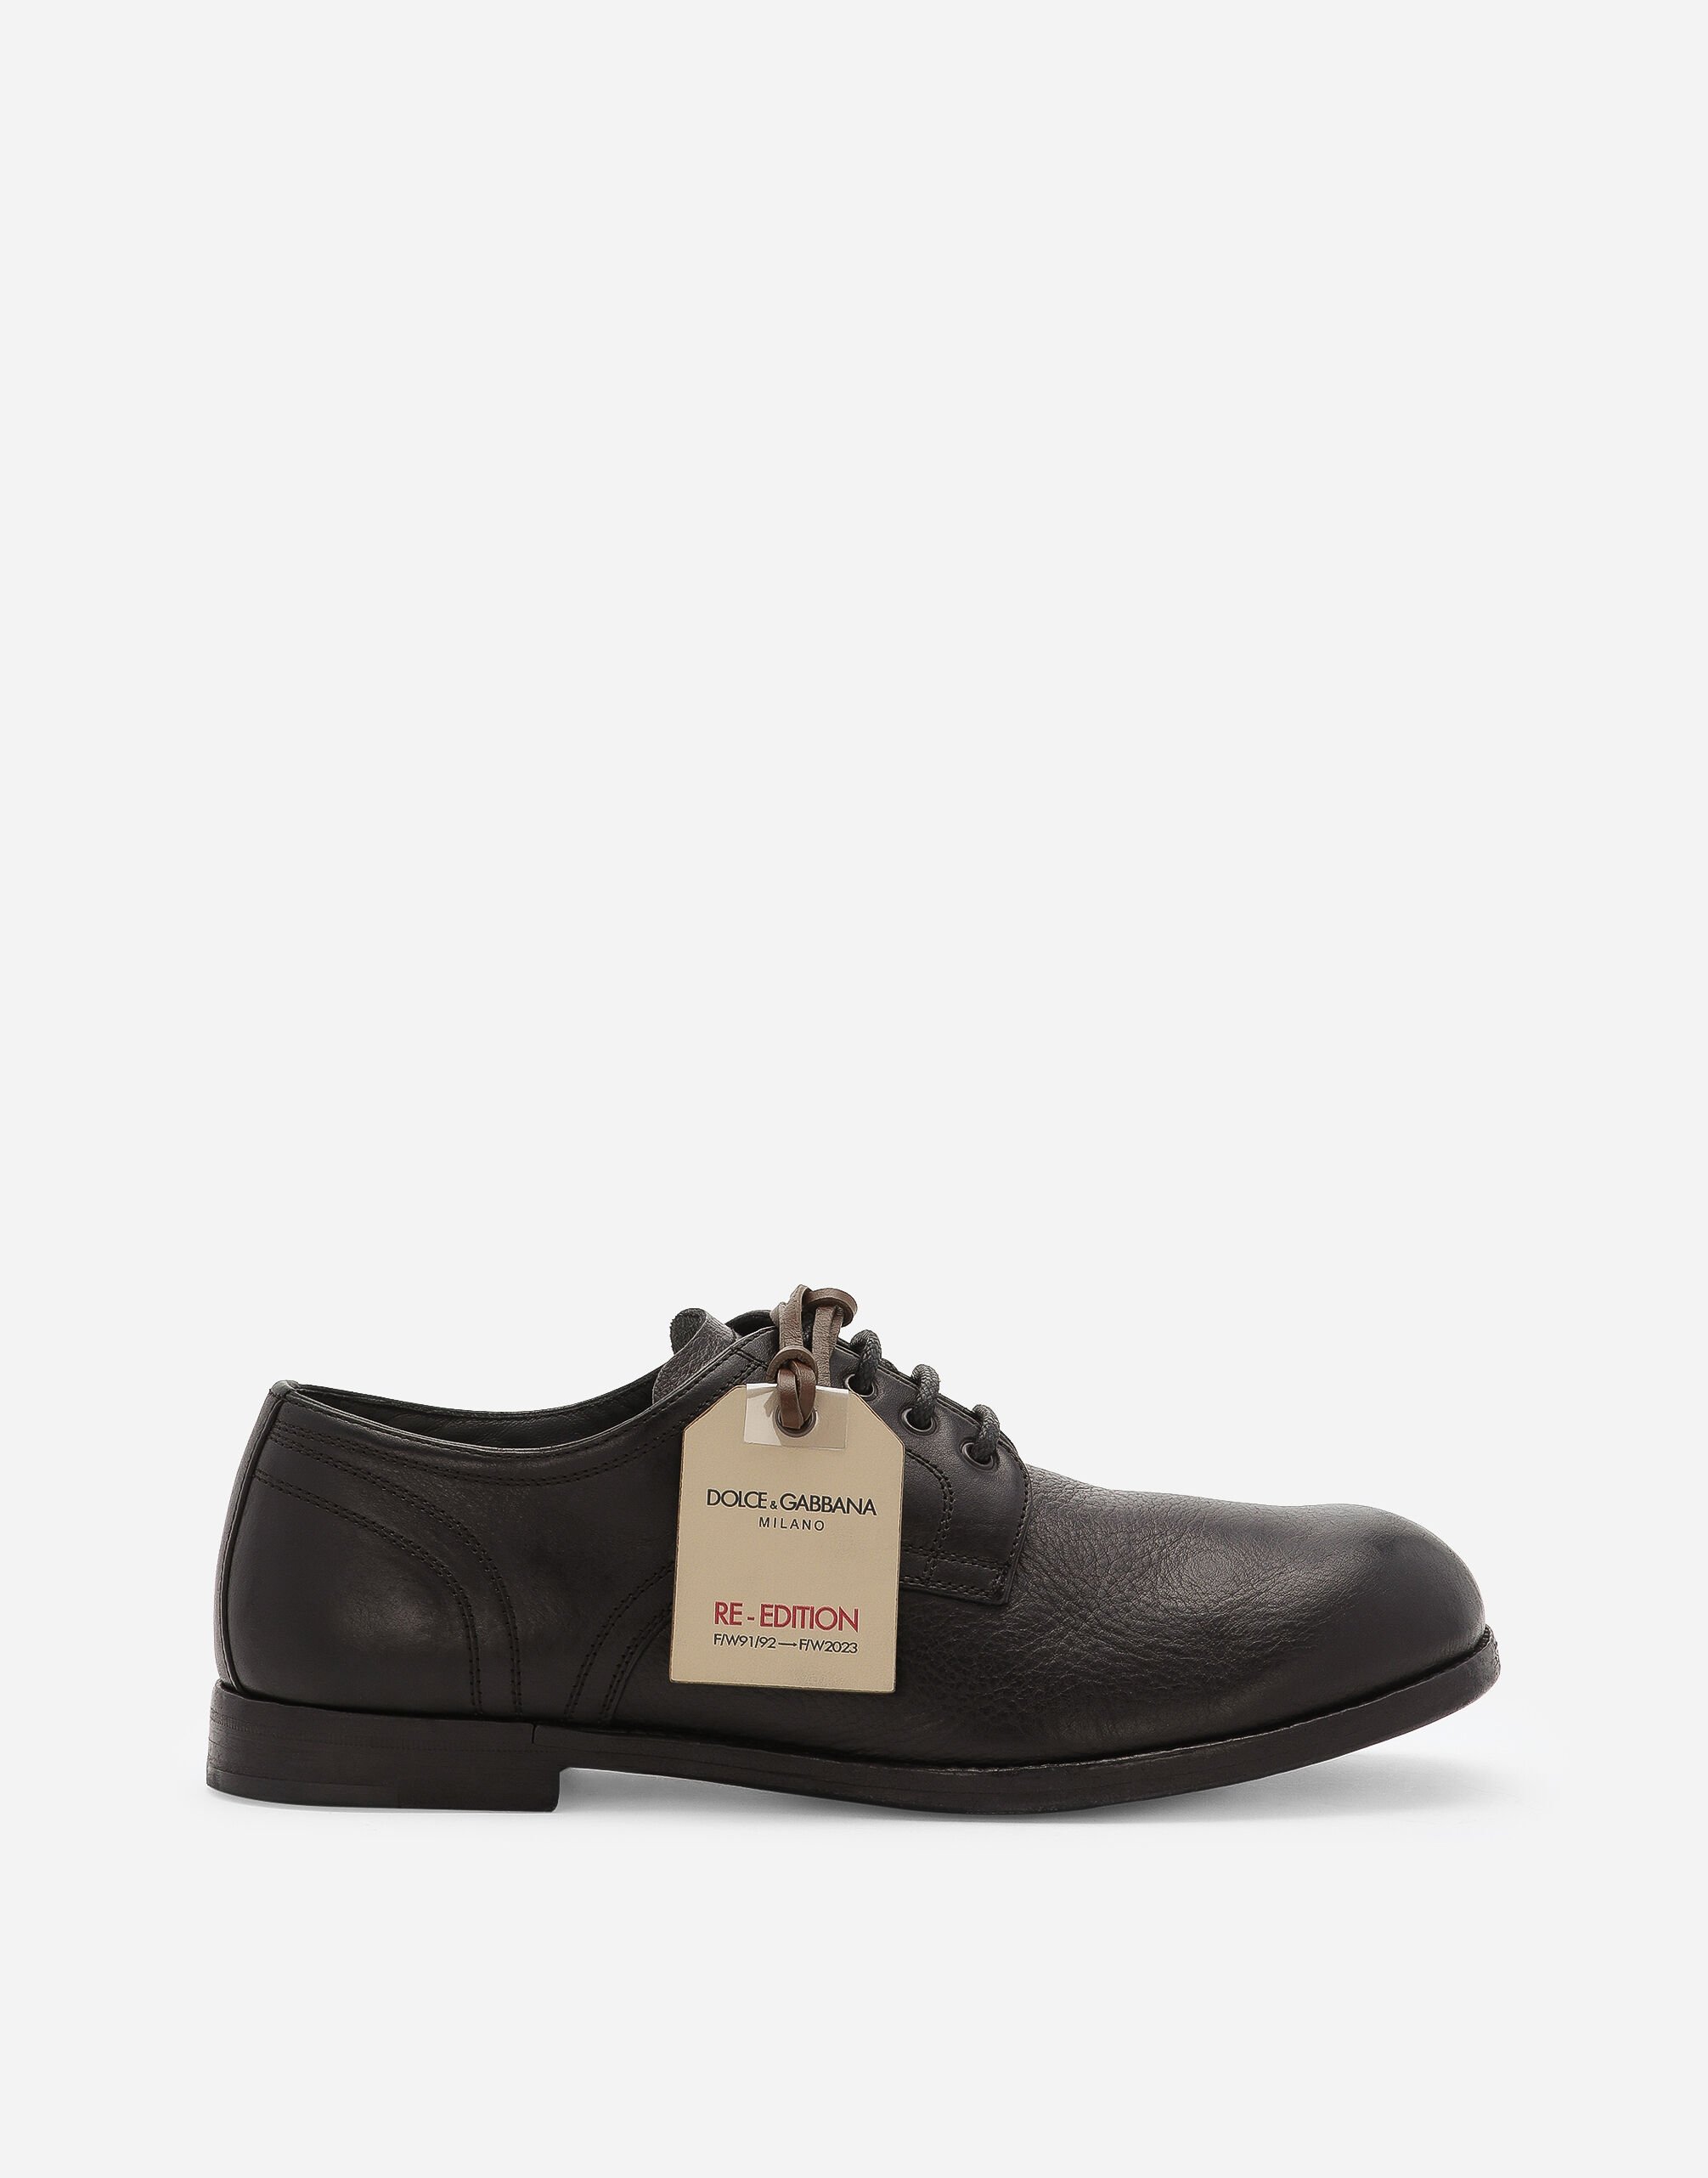 Dolce & Gabbana Leather Derby Shoes Black A10792A1203